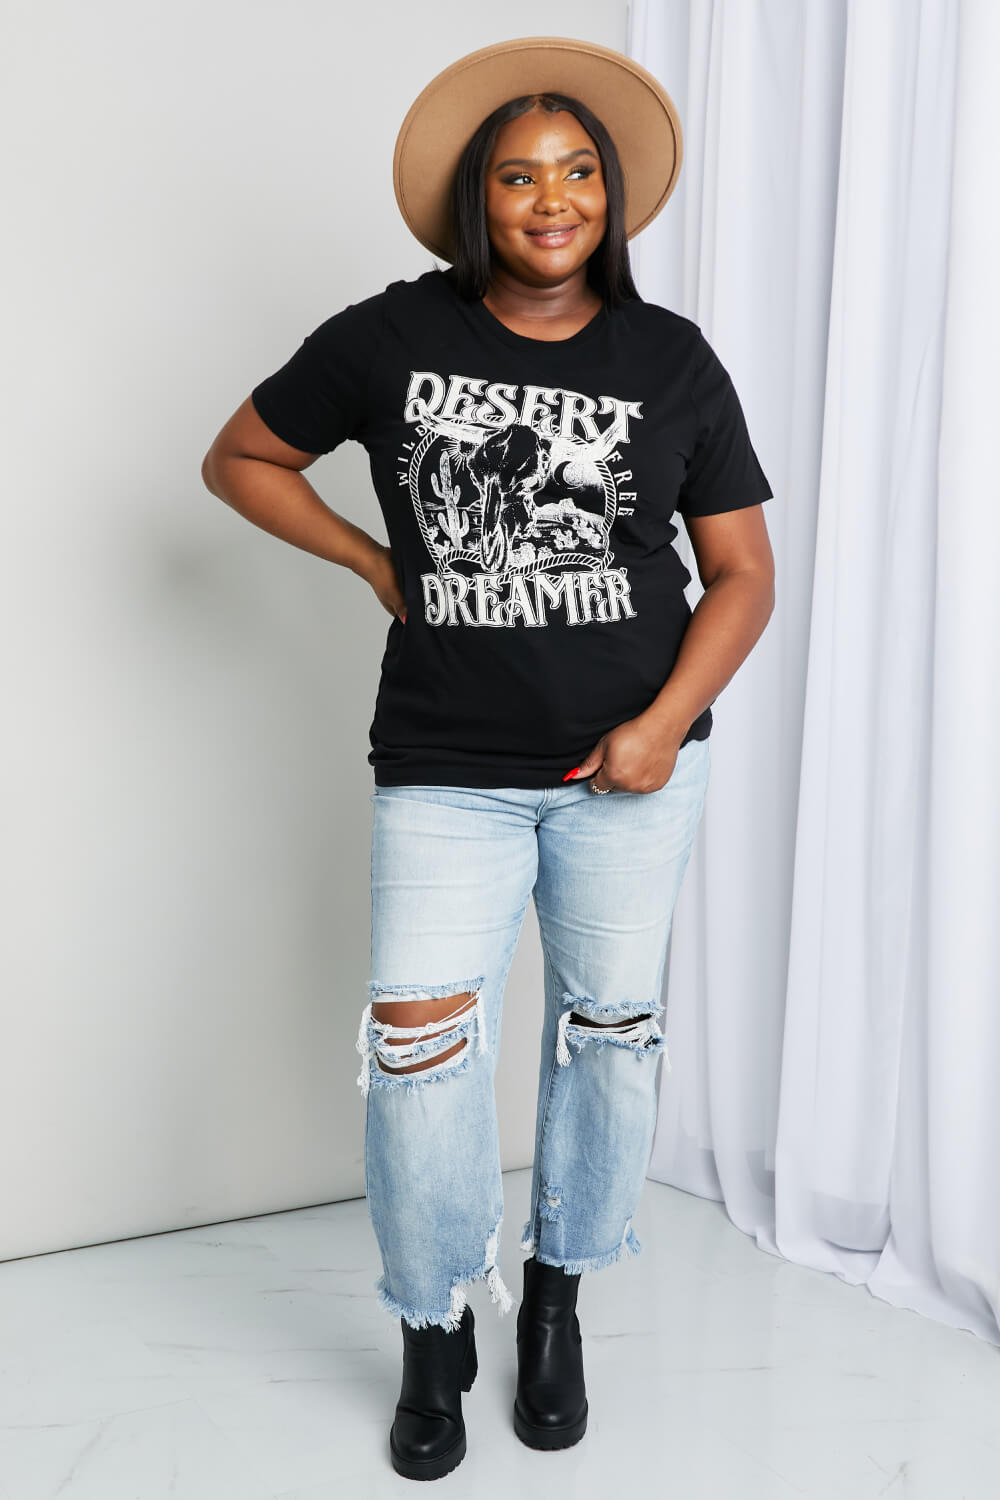 Woman modeling black tee with graphic print with white ink print - "Desert Dreamer" 